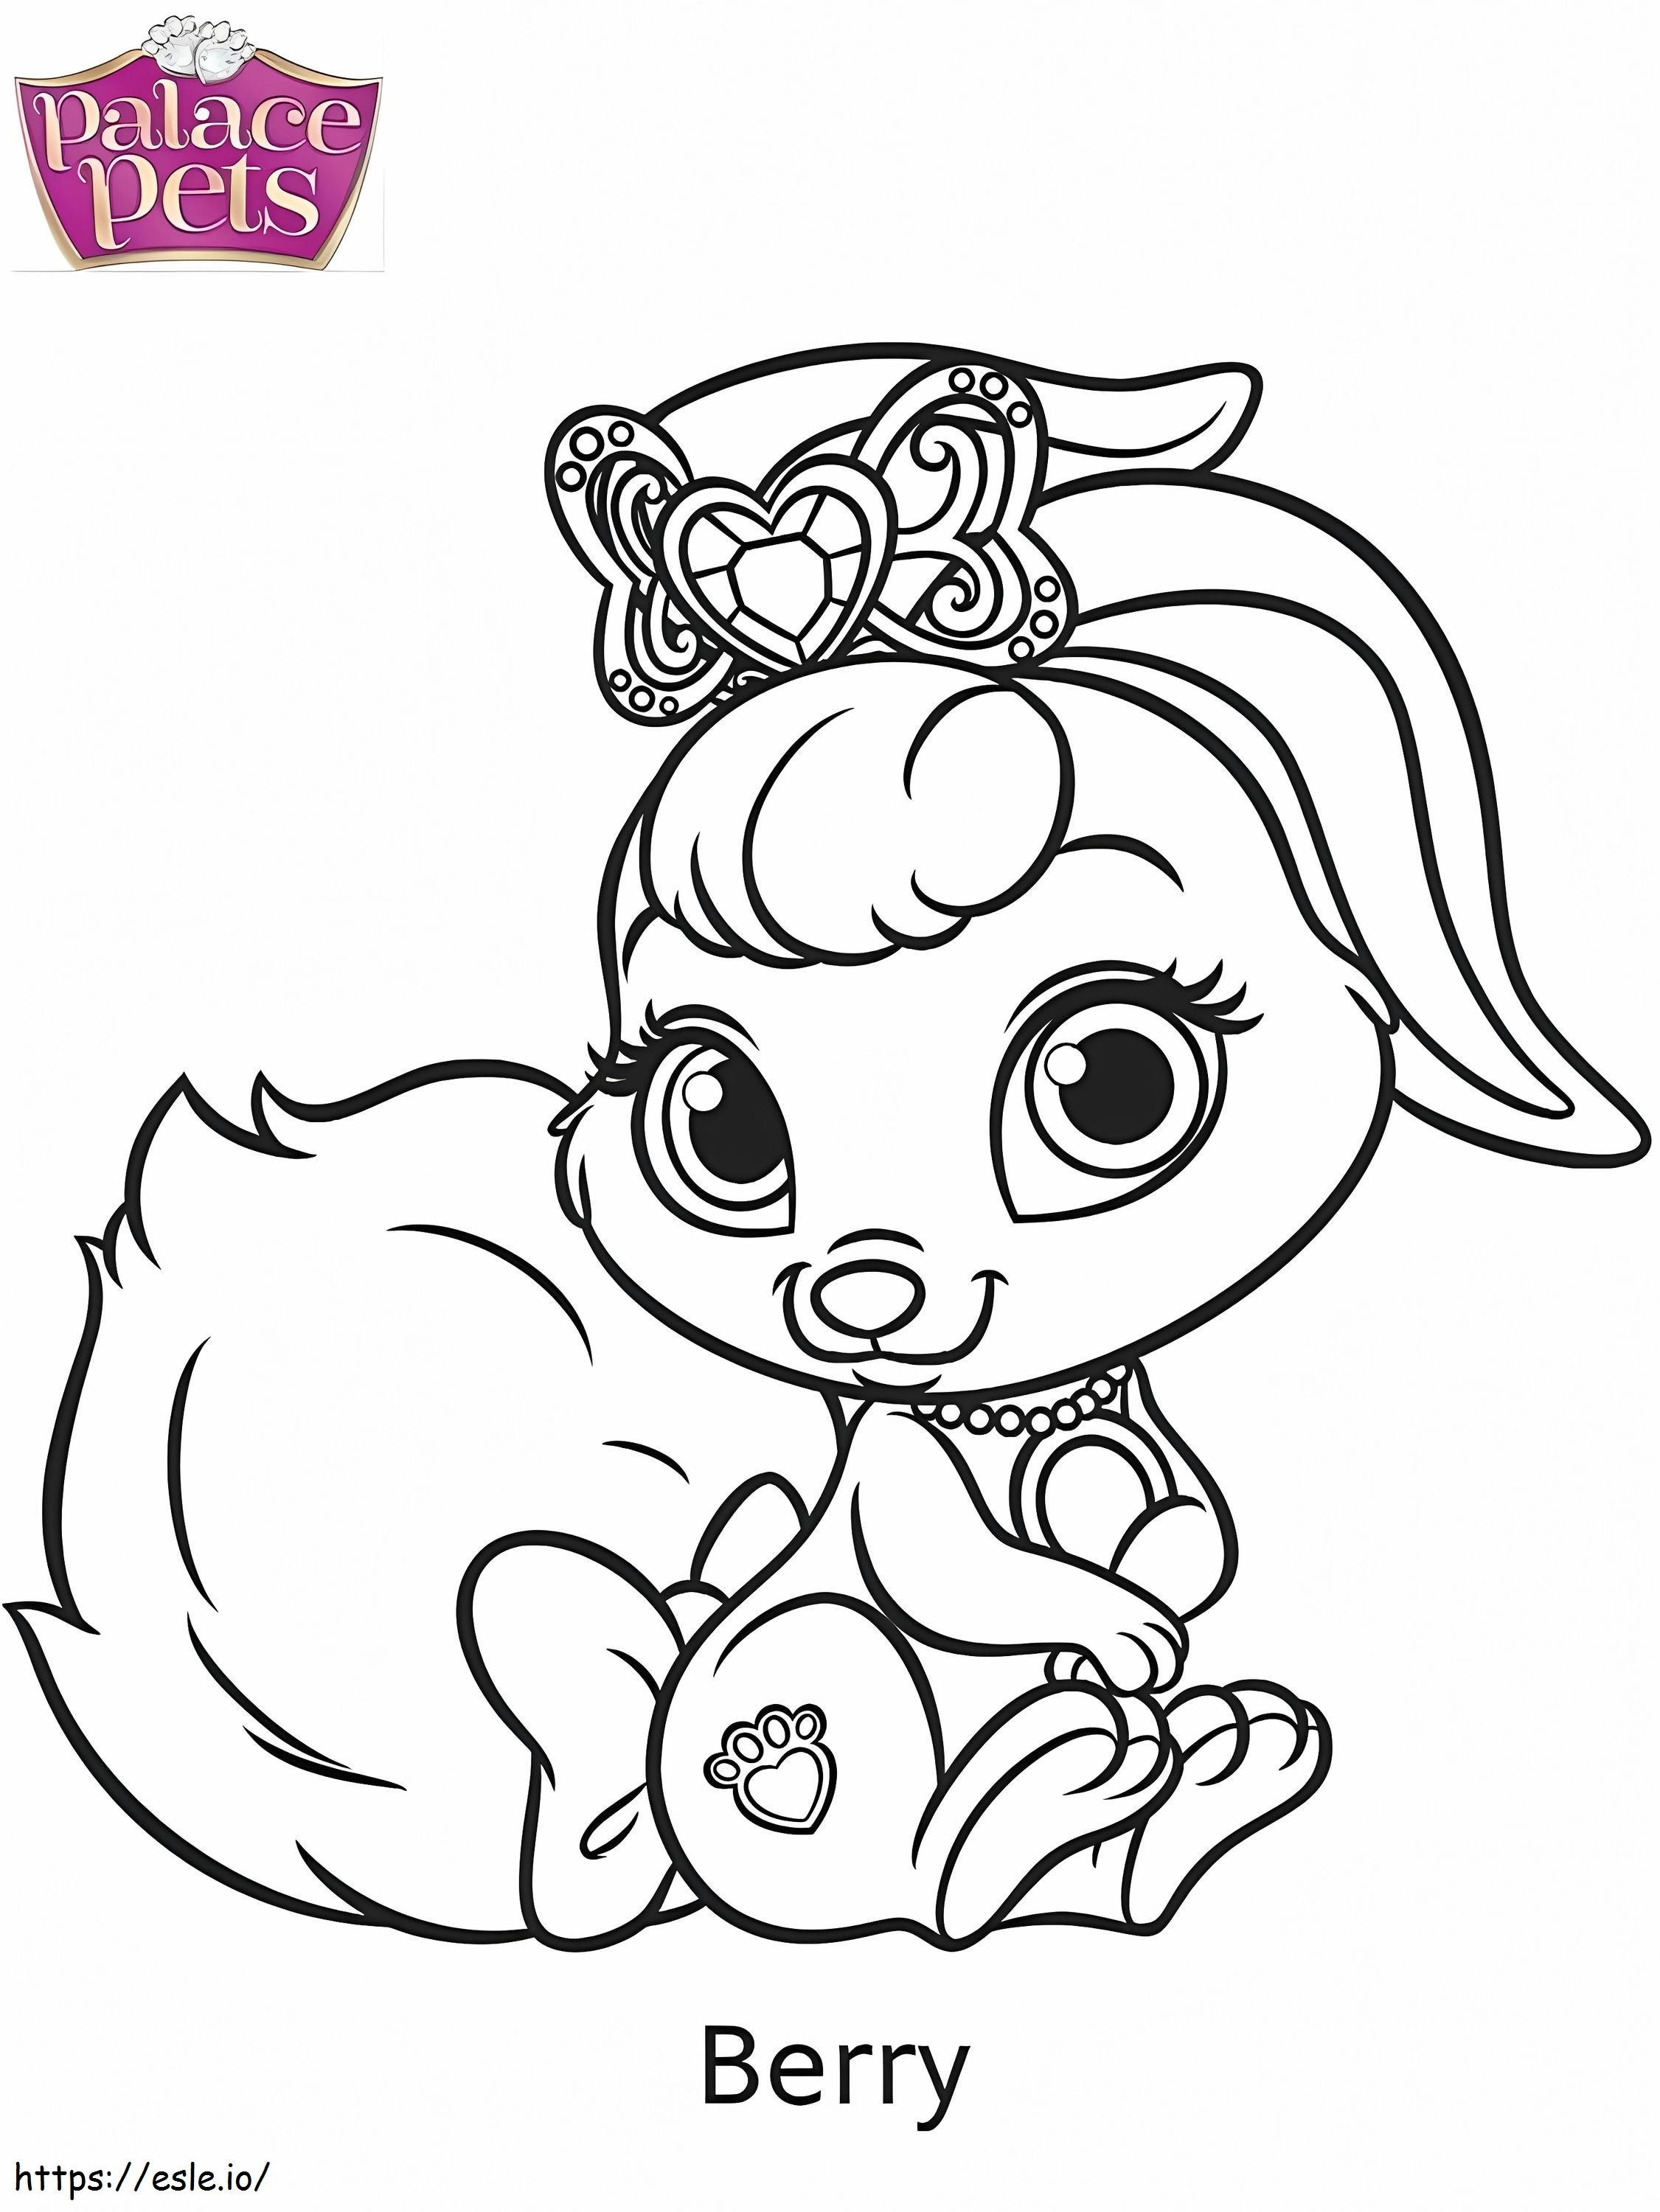 1587370434 Palace Pets Berry coloring page